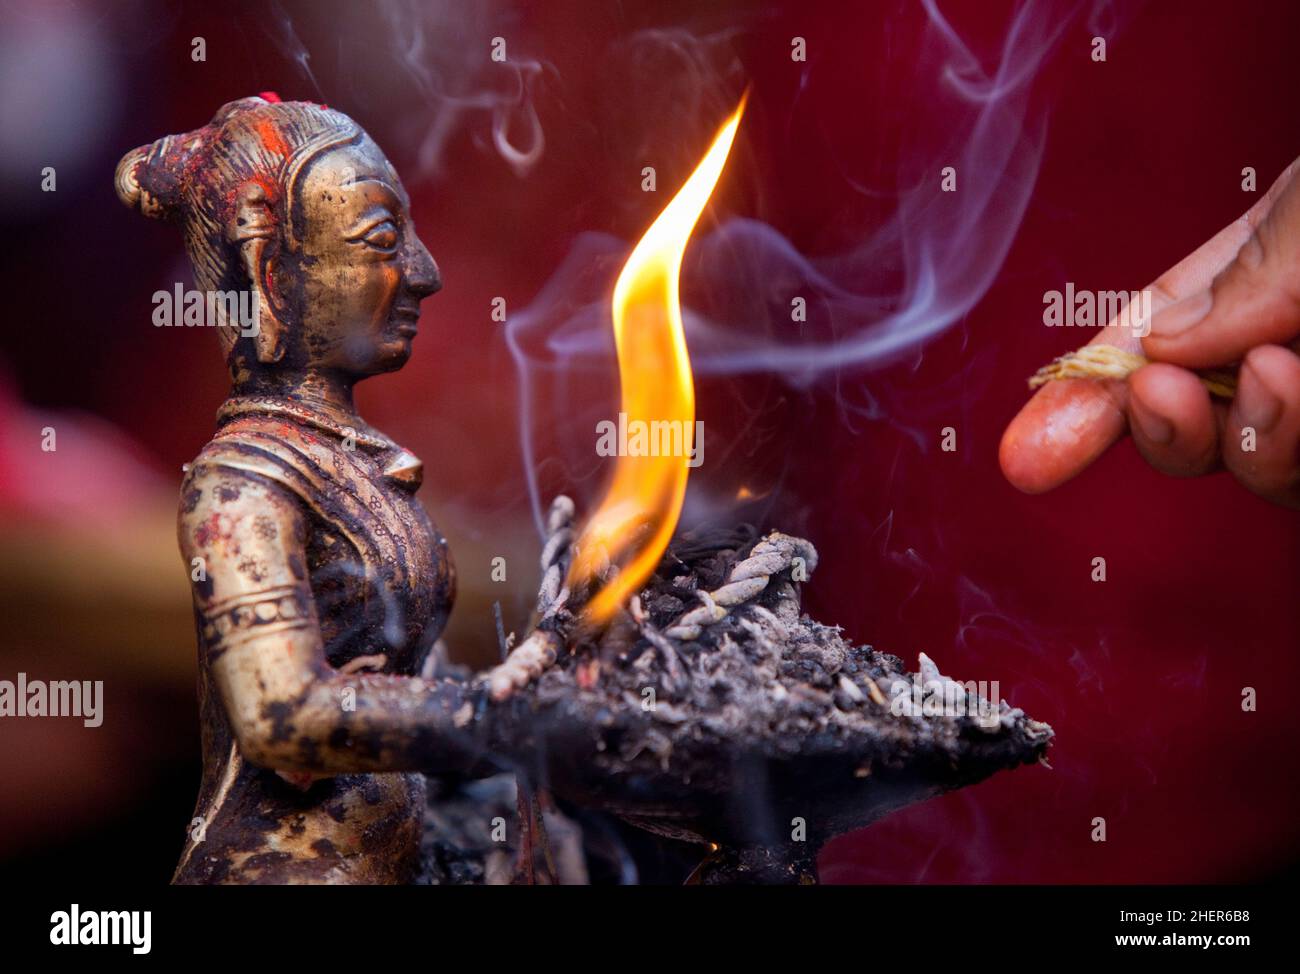 Hindu idol with burning incense and smeared in scarlet during Nepali New Year (Bisket Jatra) festivities in Bhaktapur. Stock Photo